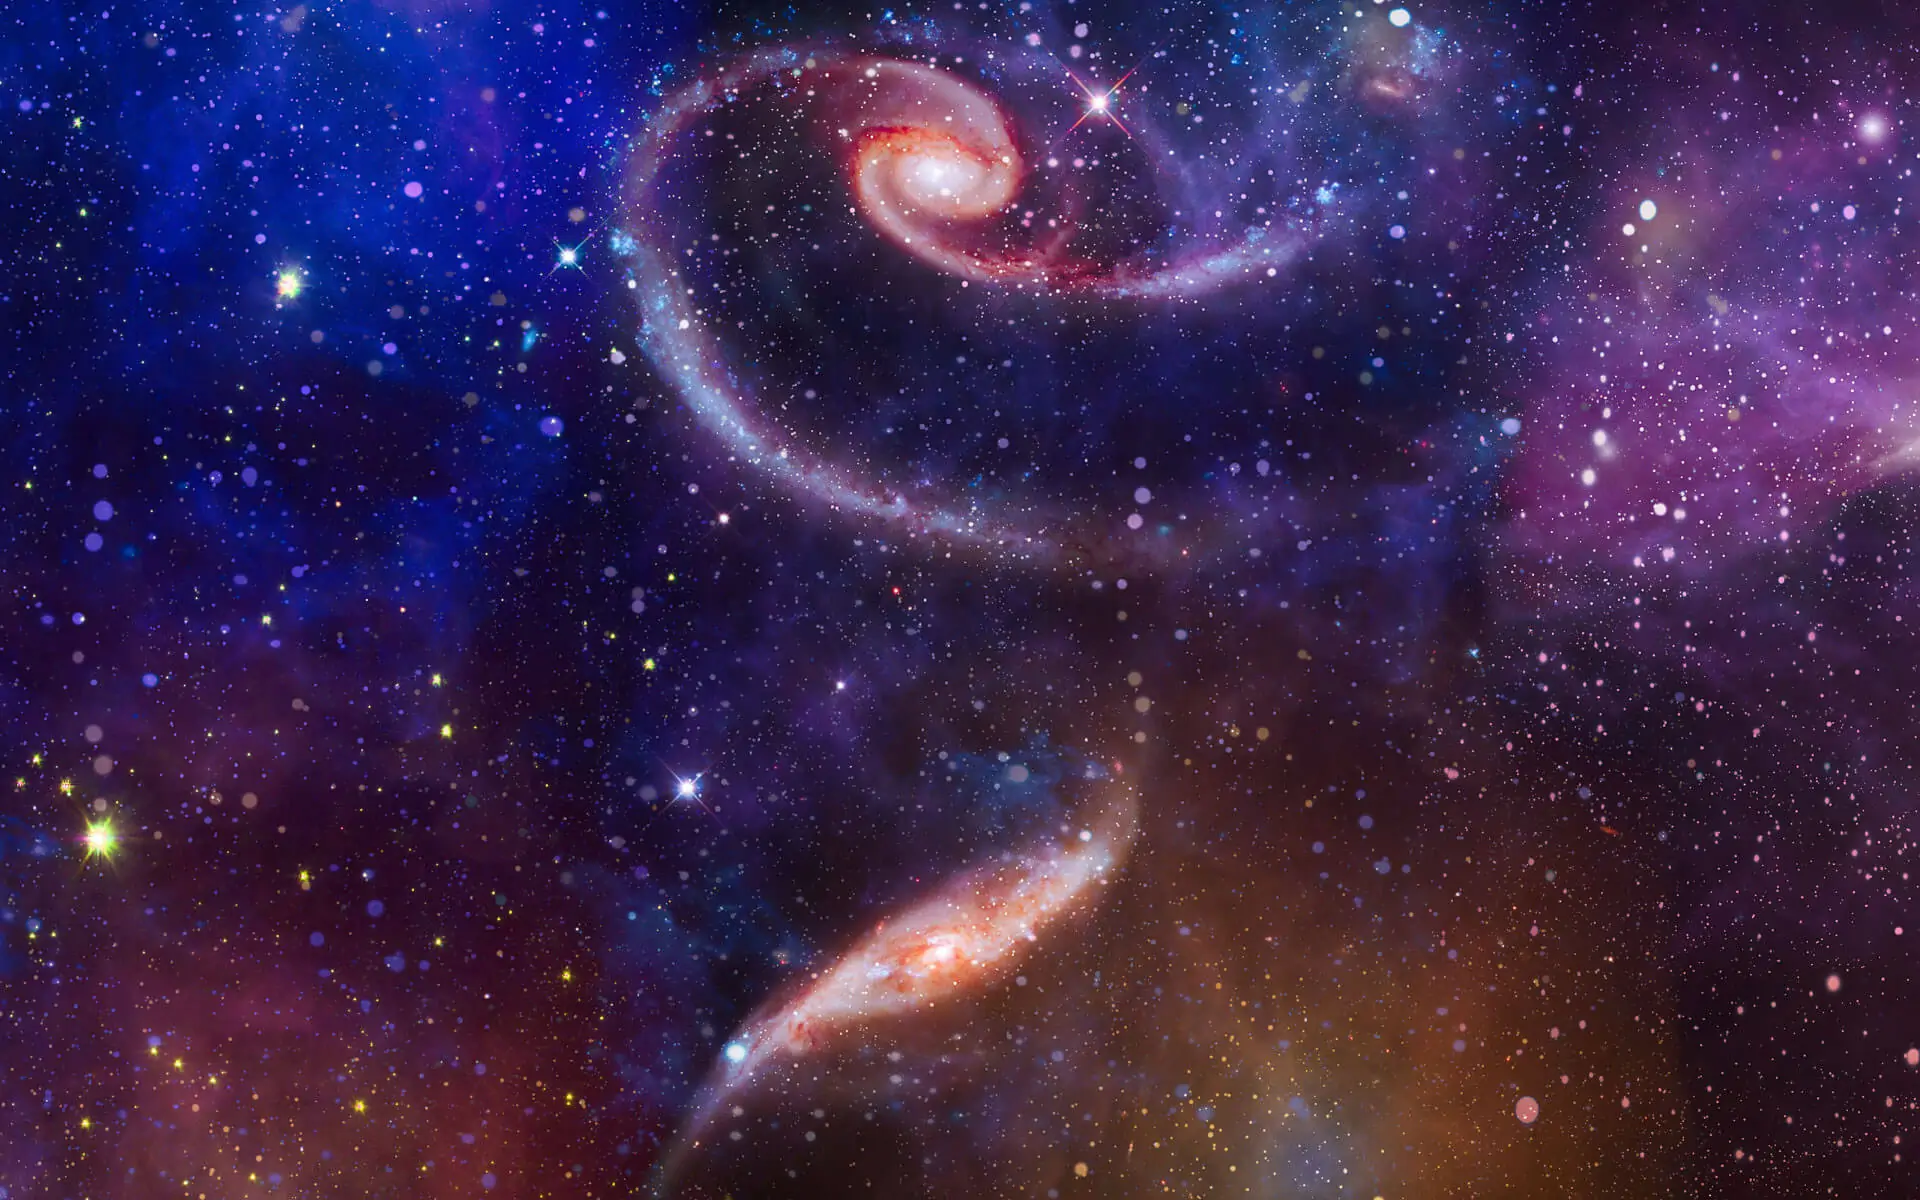 Swirls of stars in space representing how everything is energy